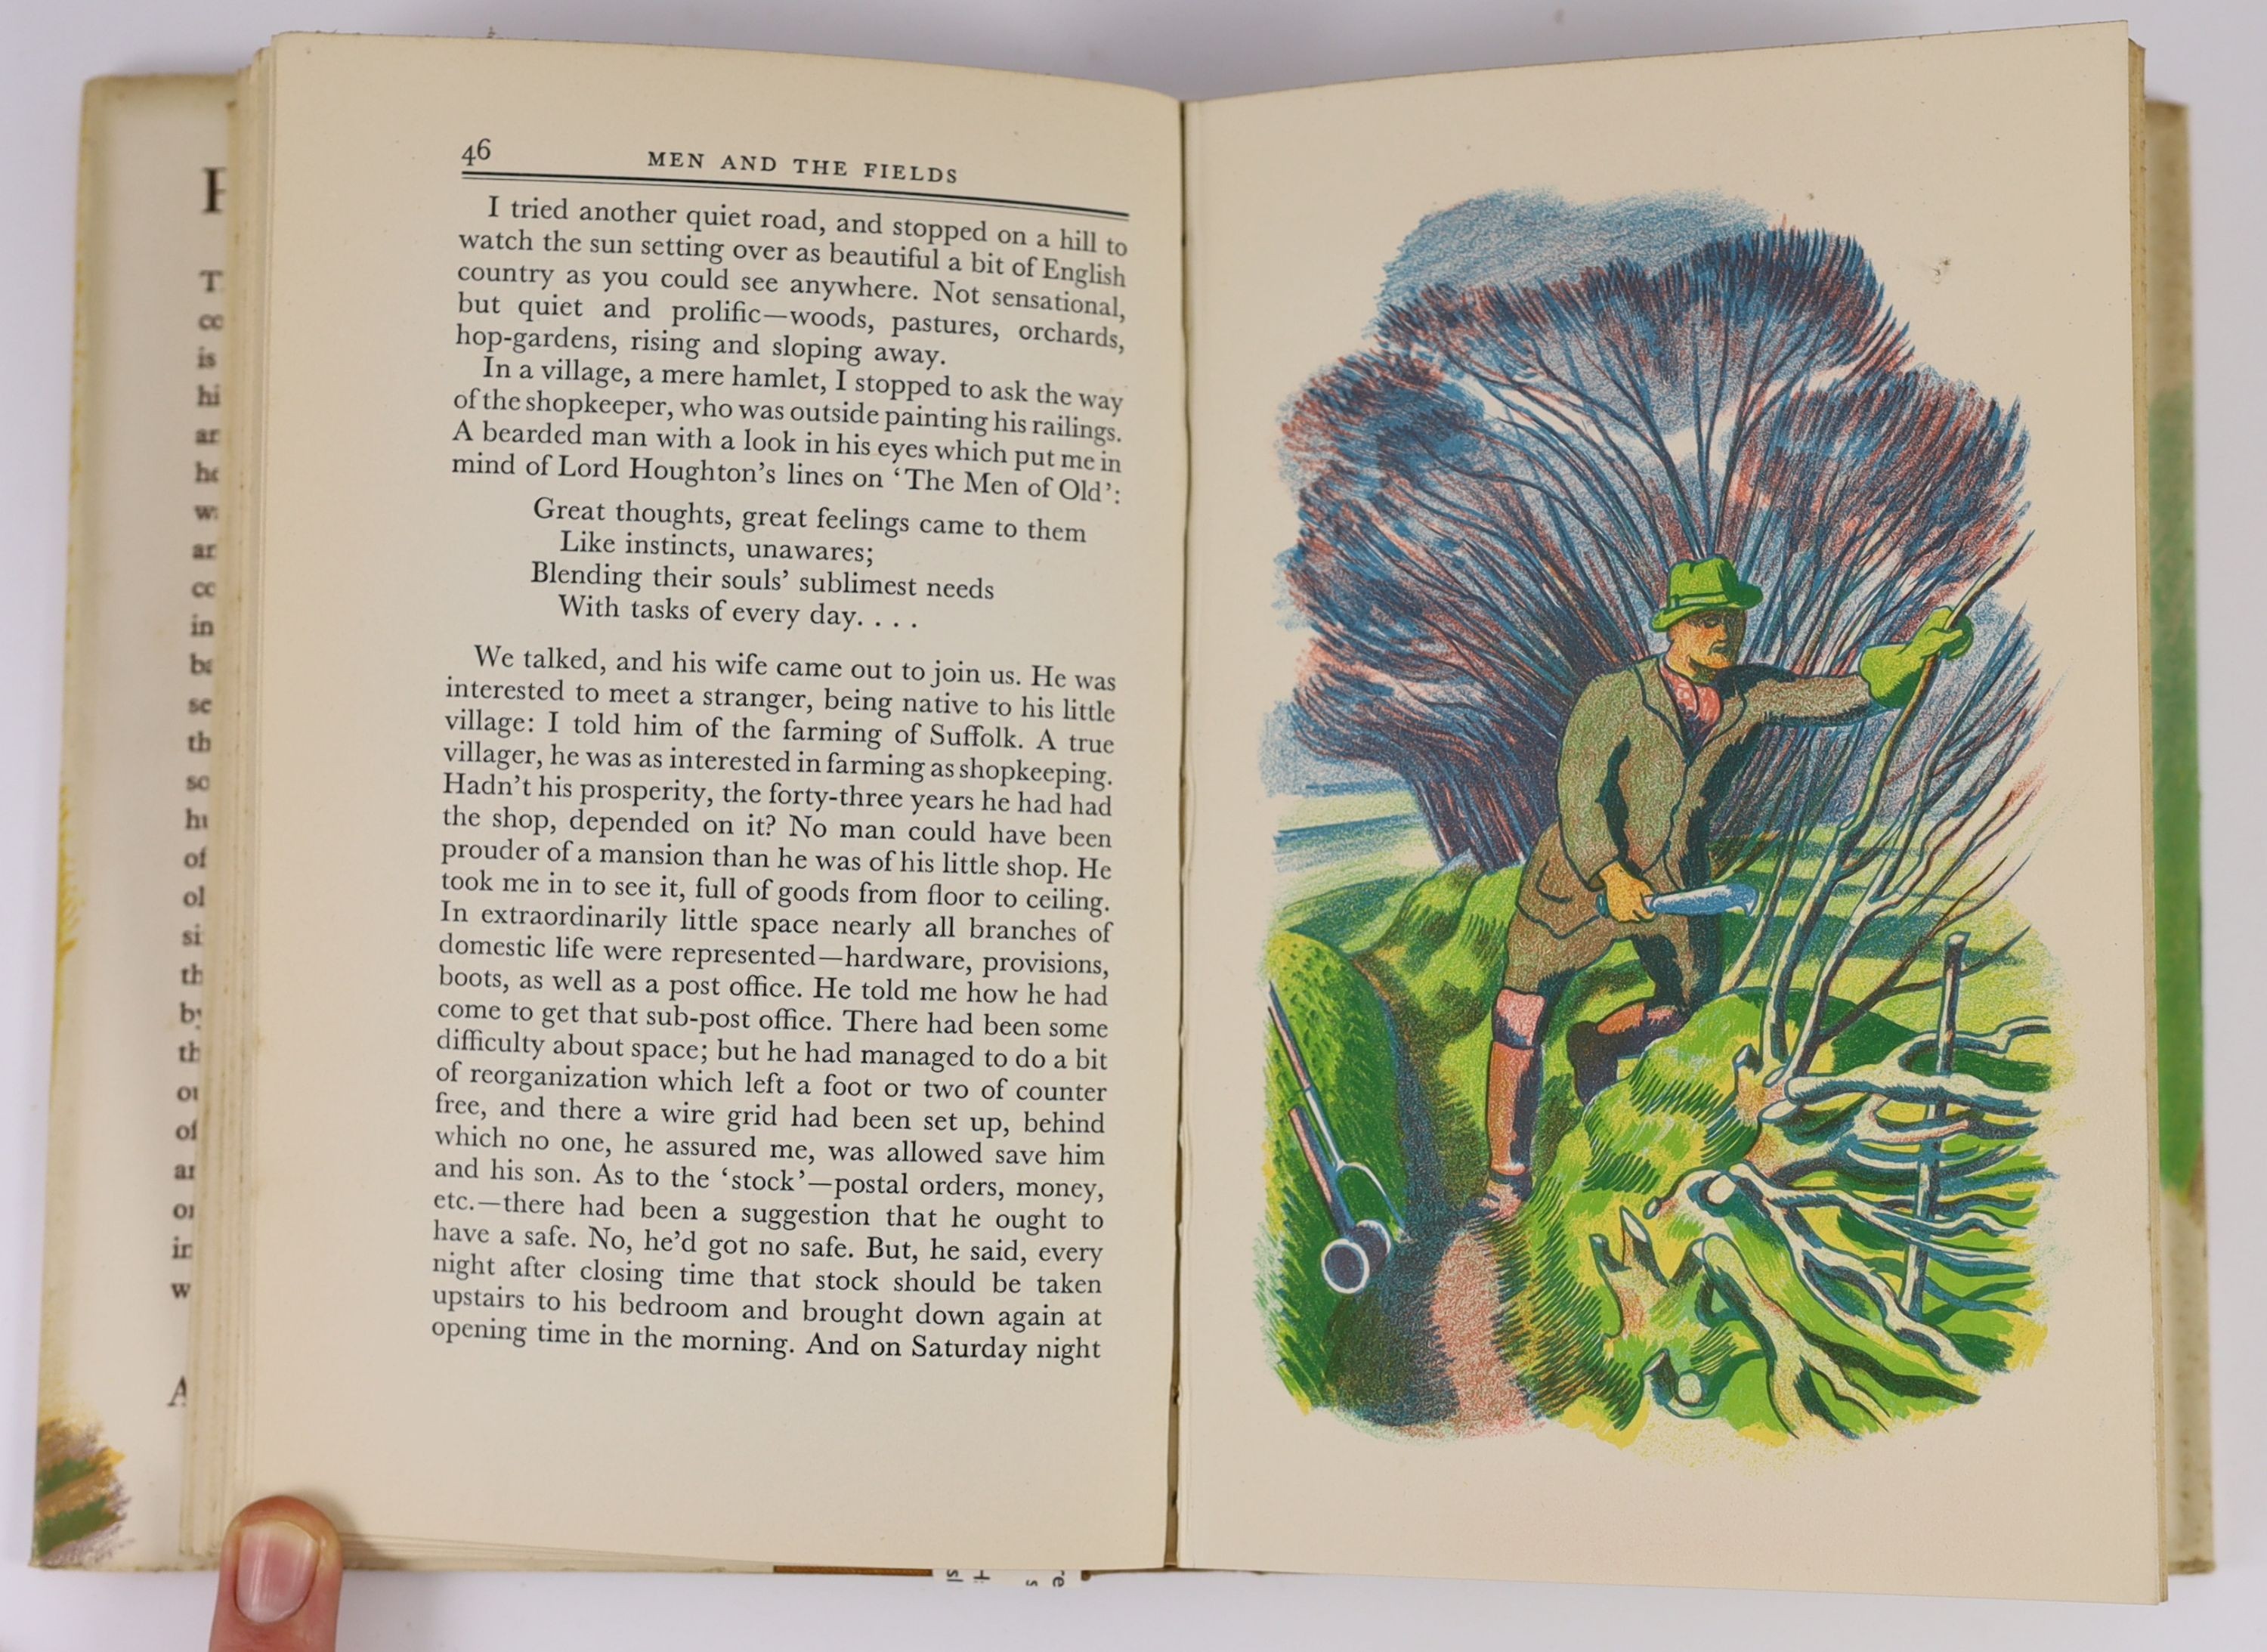 Bell, Adrian - Men and the Fields. 1st edition. Complete with 6 lithographic plates by John Nash, as well as numerous B+W illustrations in the text. Publishers buckram with gilt letters on spine, In original pictorial d/